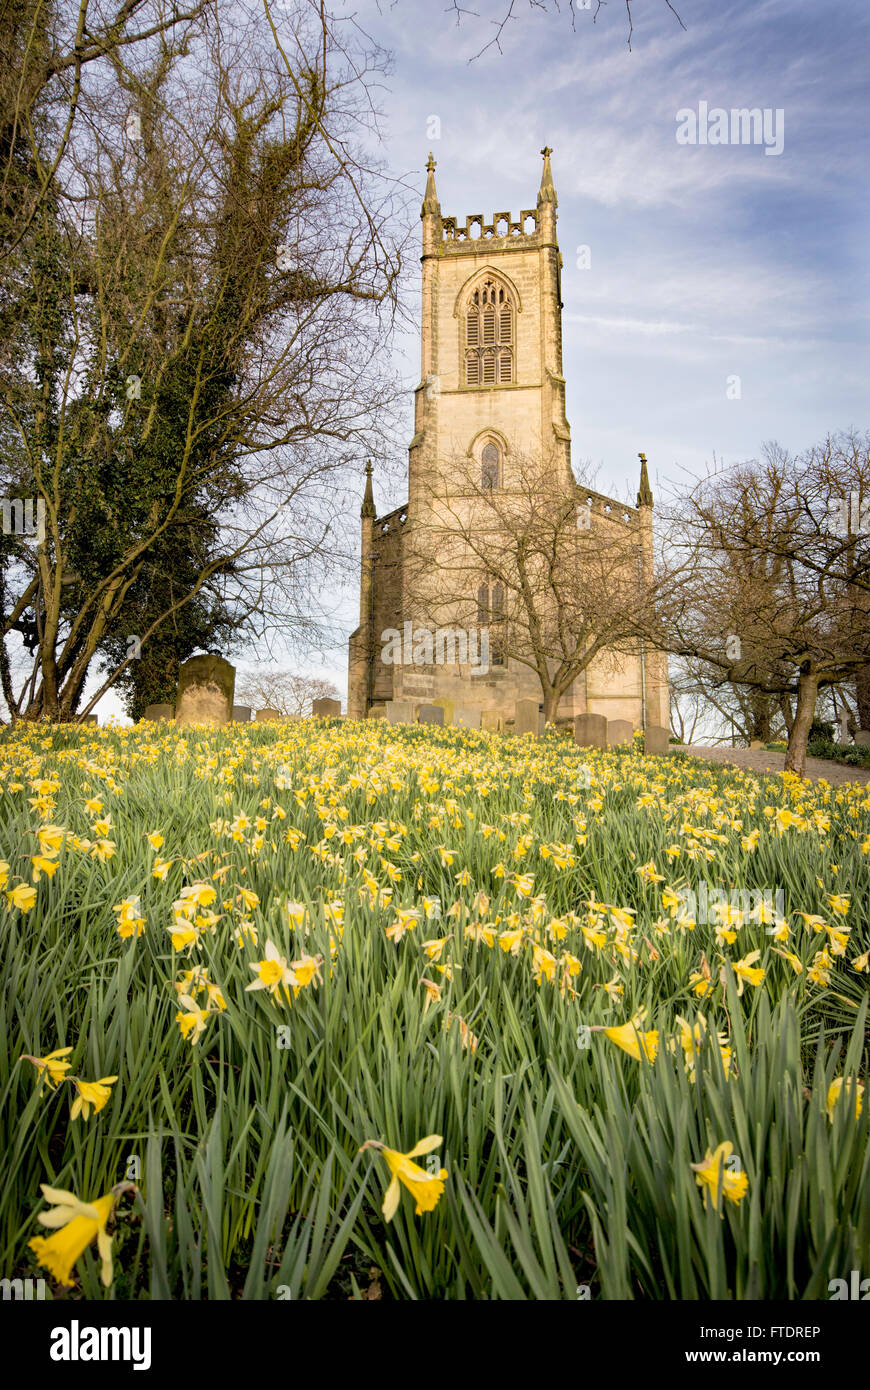 Birdsall Church, carpeted with Daffodils Stock Photo